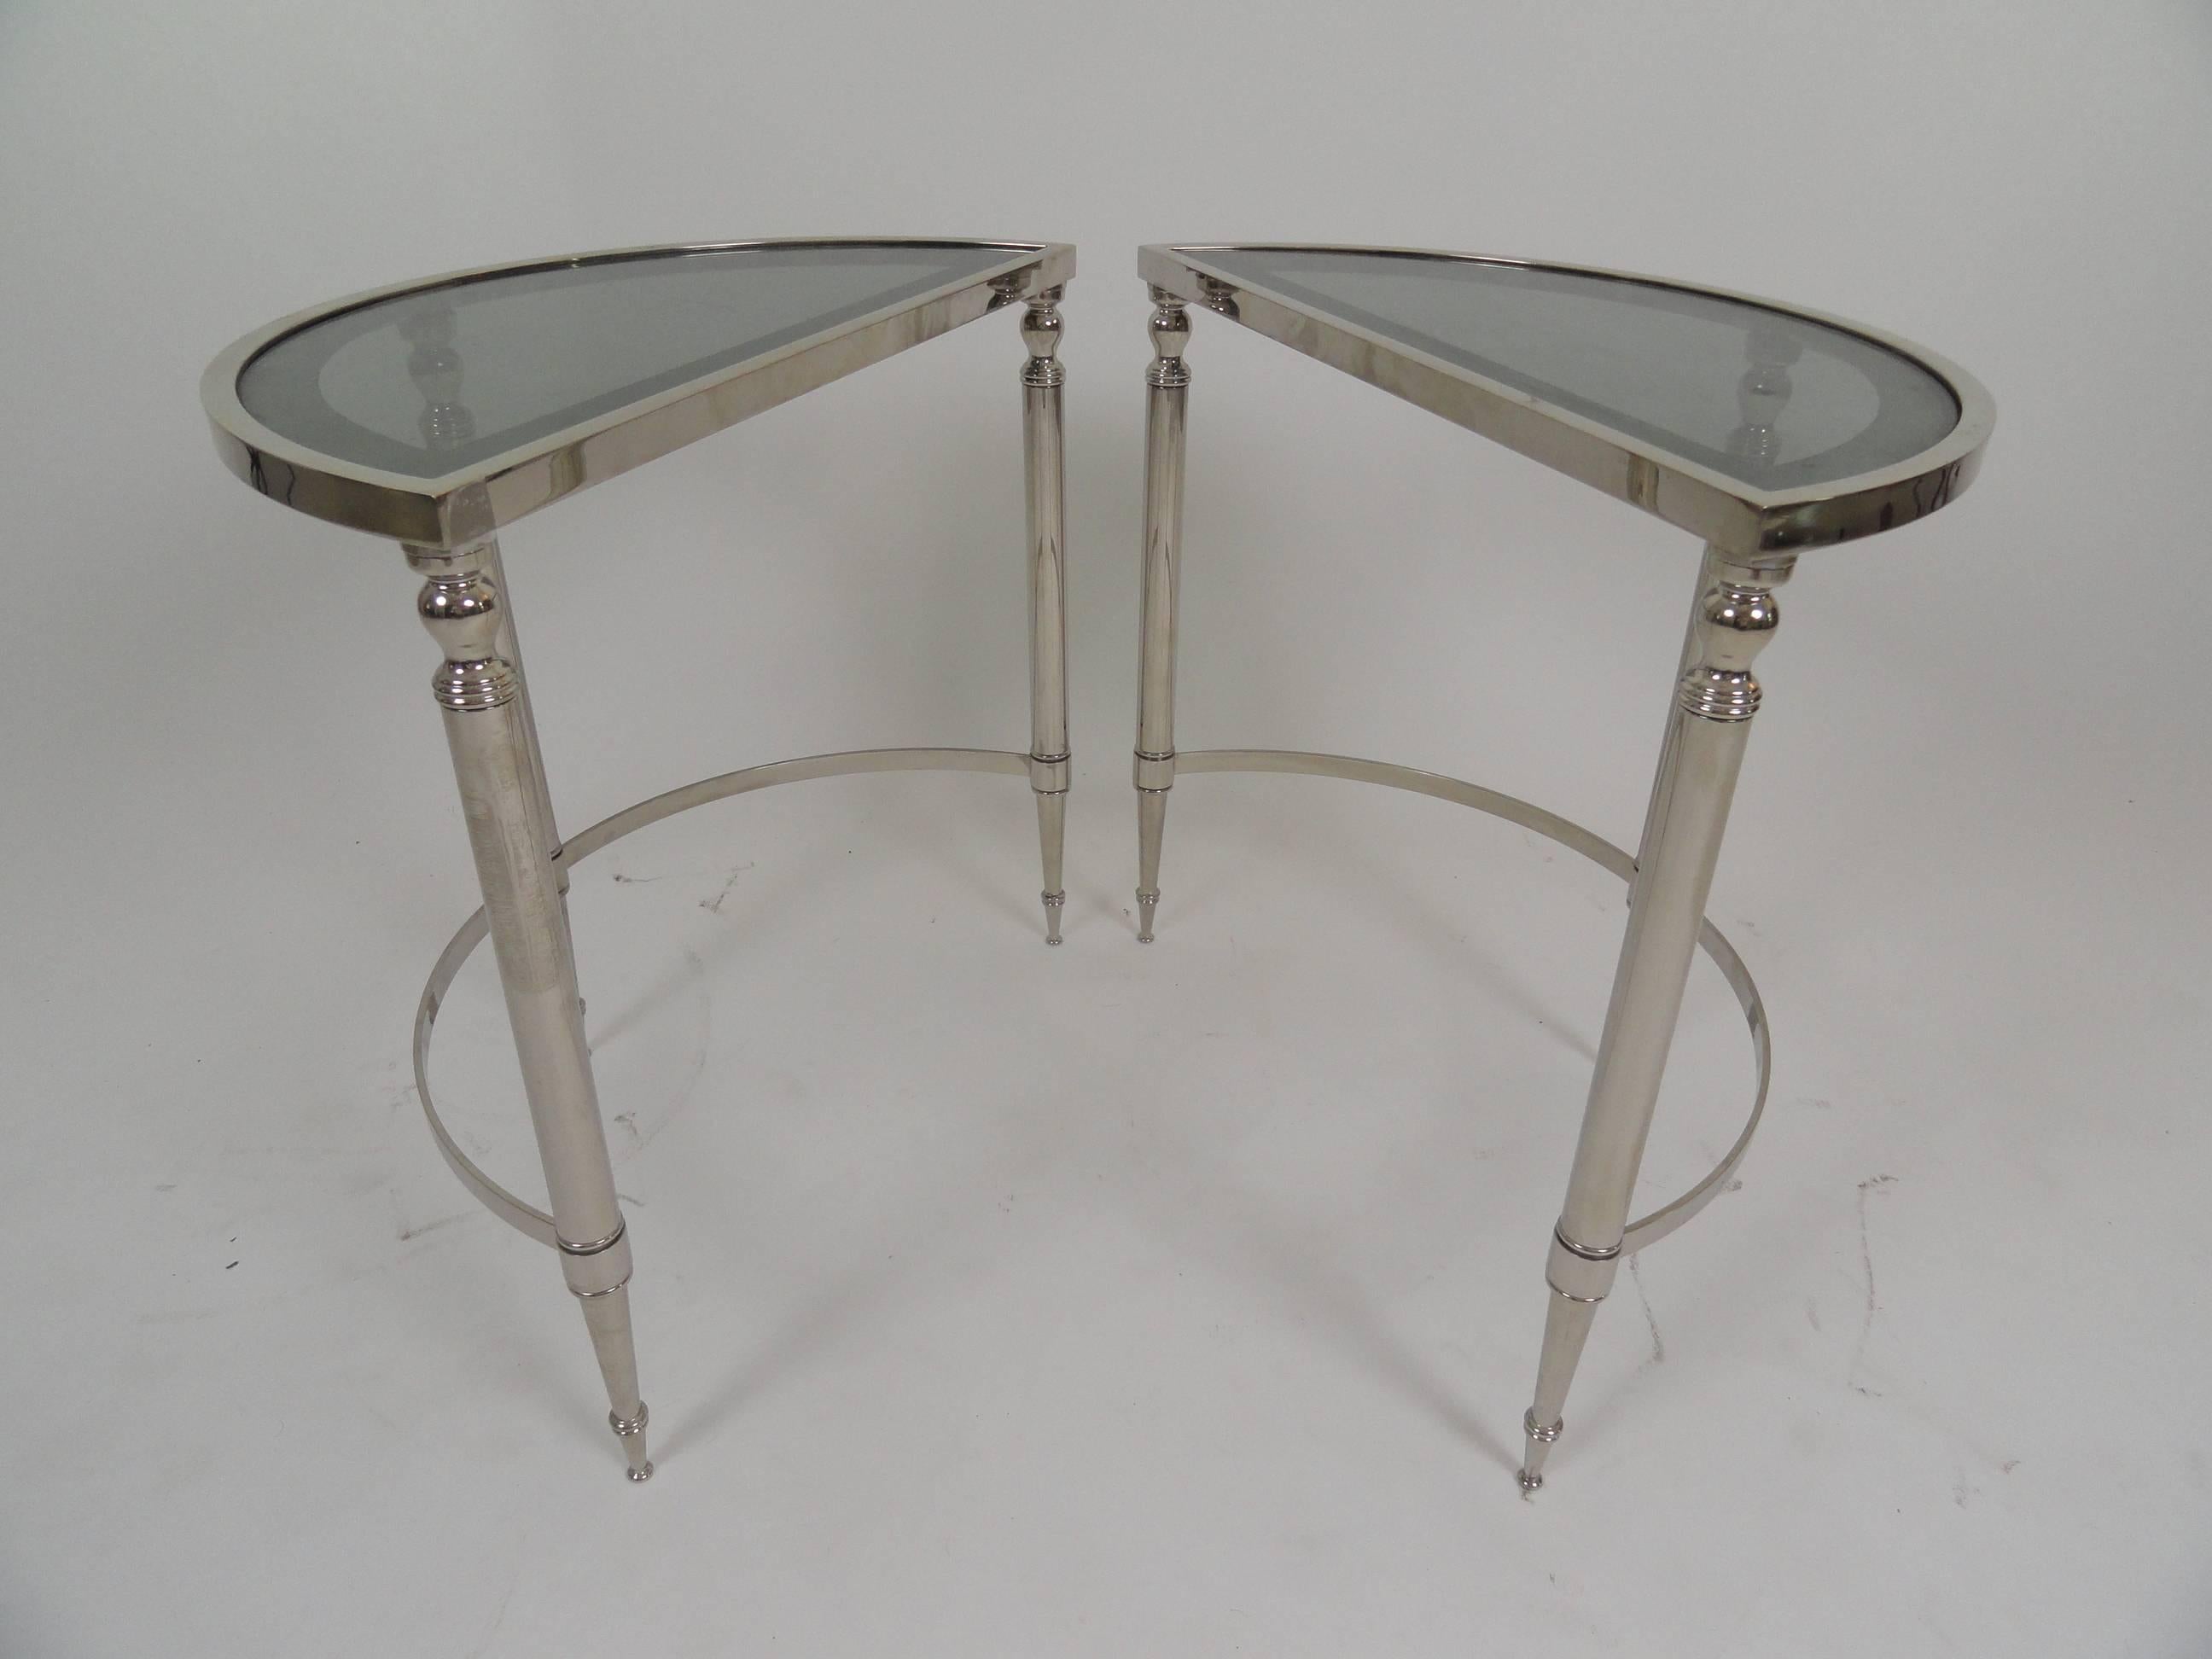 Pair of recently nickel-plated demilune tables with antiqued glass insert tops. Tables may be used together to form a round table or separately to make two half-circle tables. Nickel plating is recent and in very good condition.